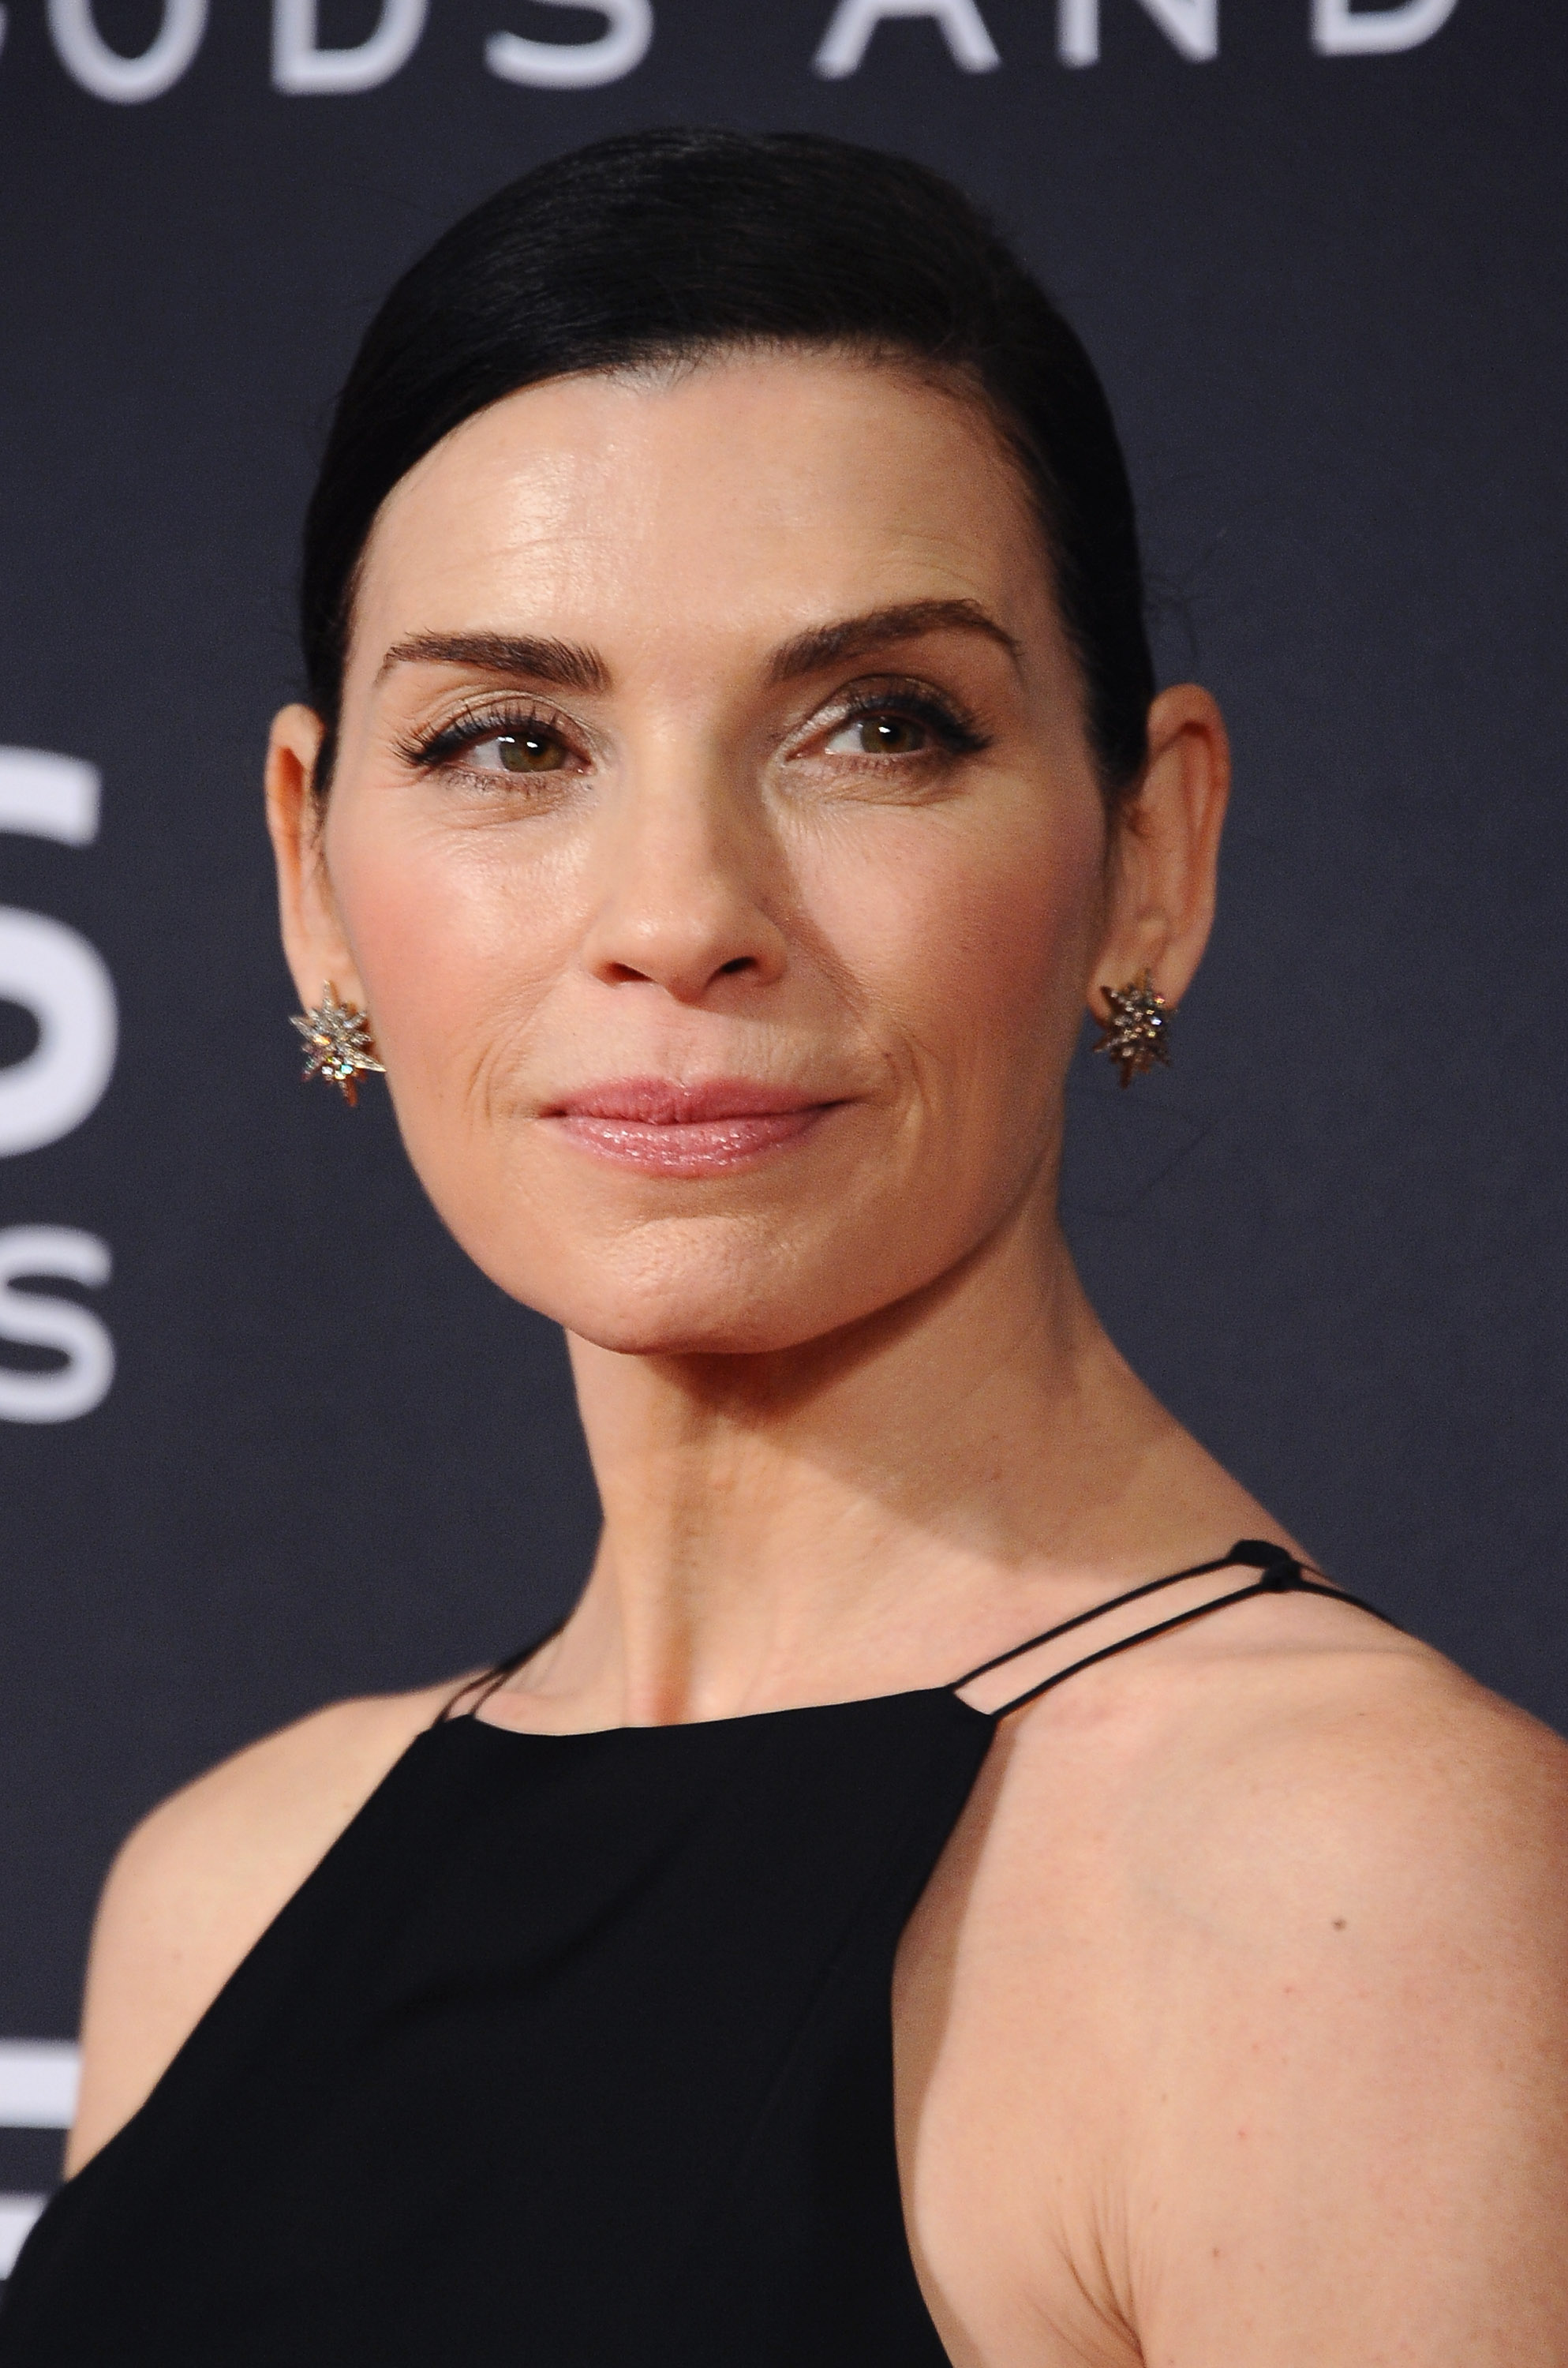 Actress Julianna Margulies attends the "Exodus: Gods And Kings" New York Premiere in New York City on Dec. 7, 2014.